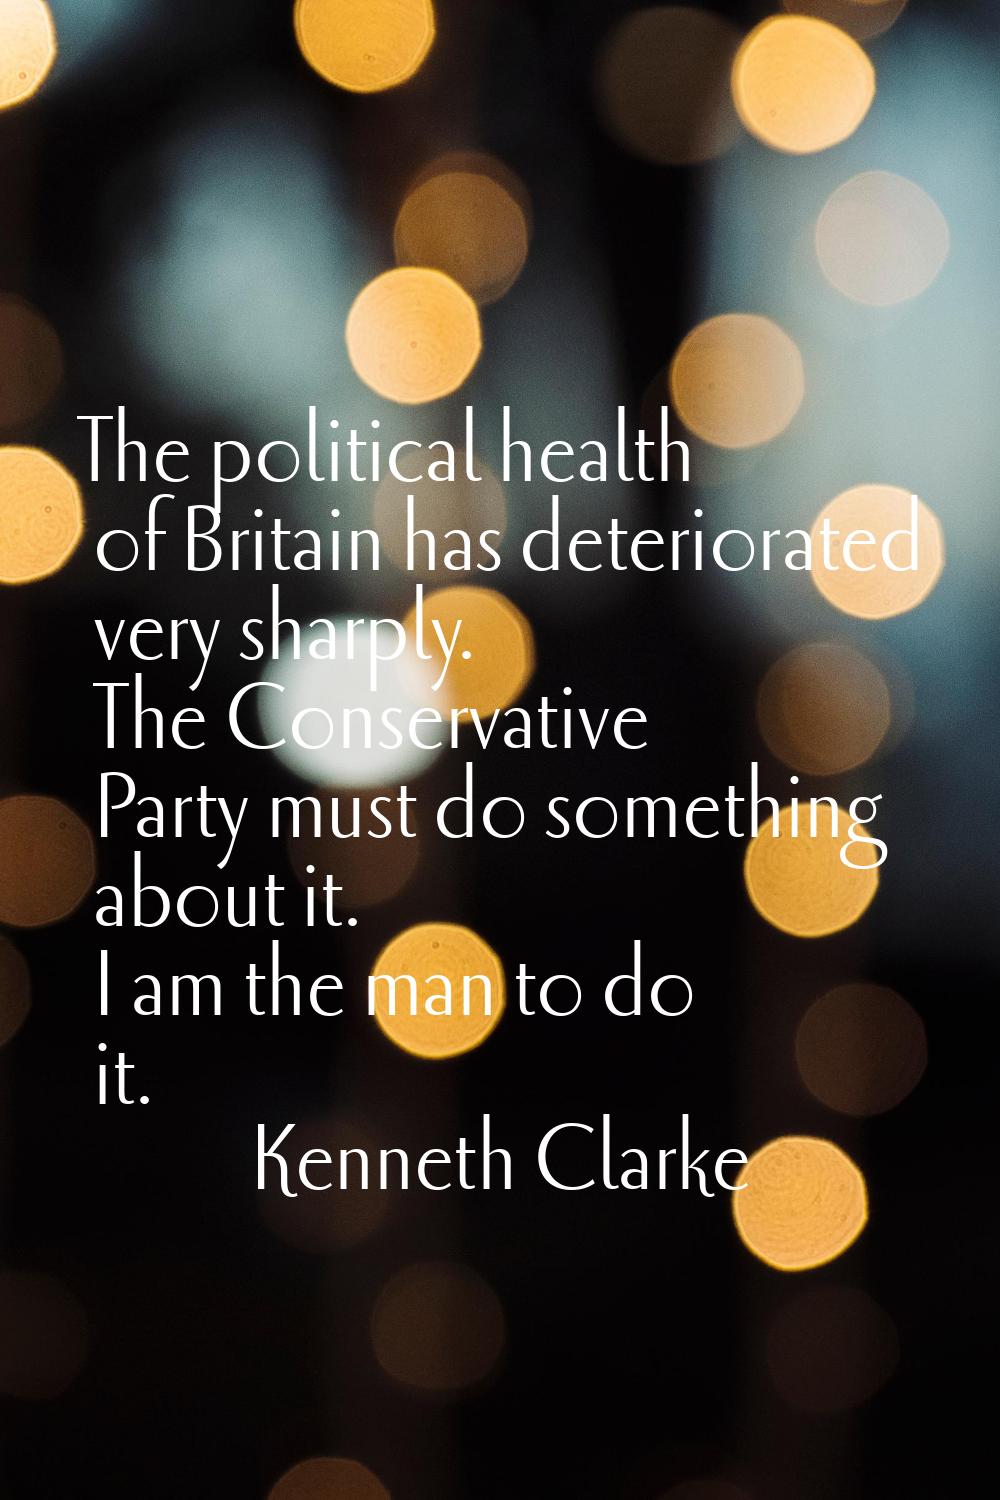 The political health of Britain has deteriorated very sharply. The Conservative Party must do somet